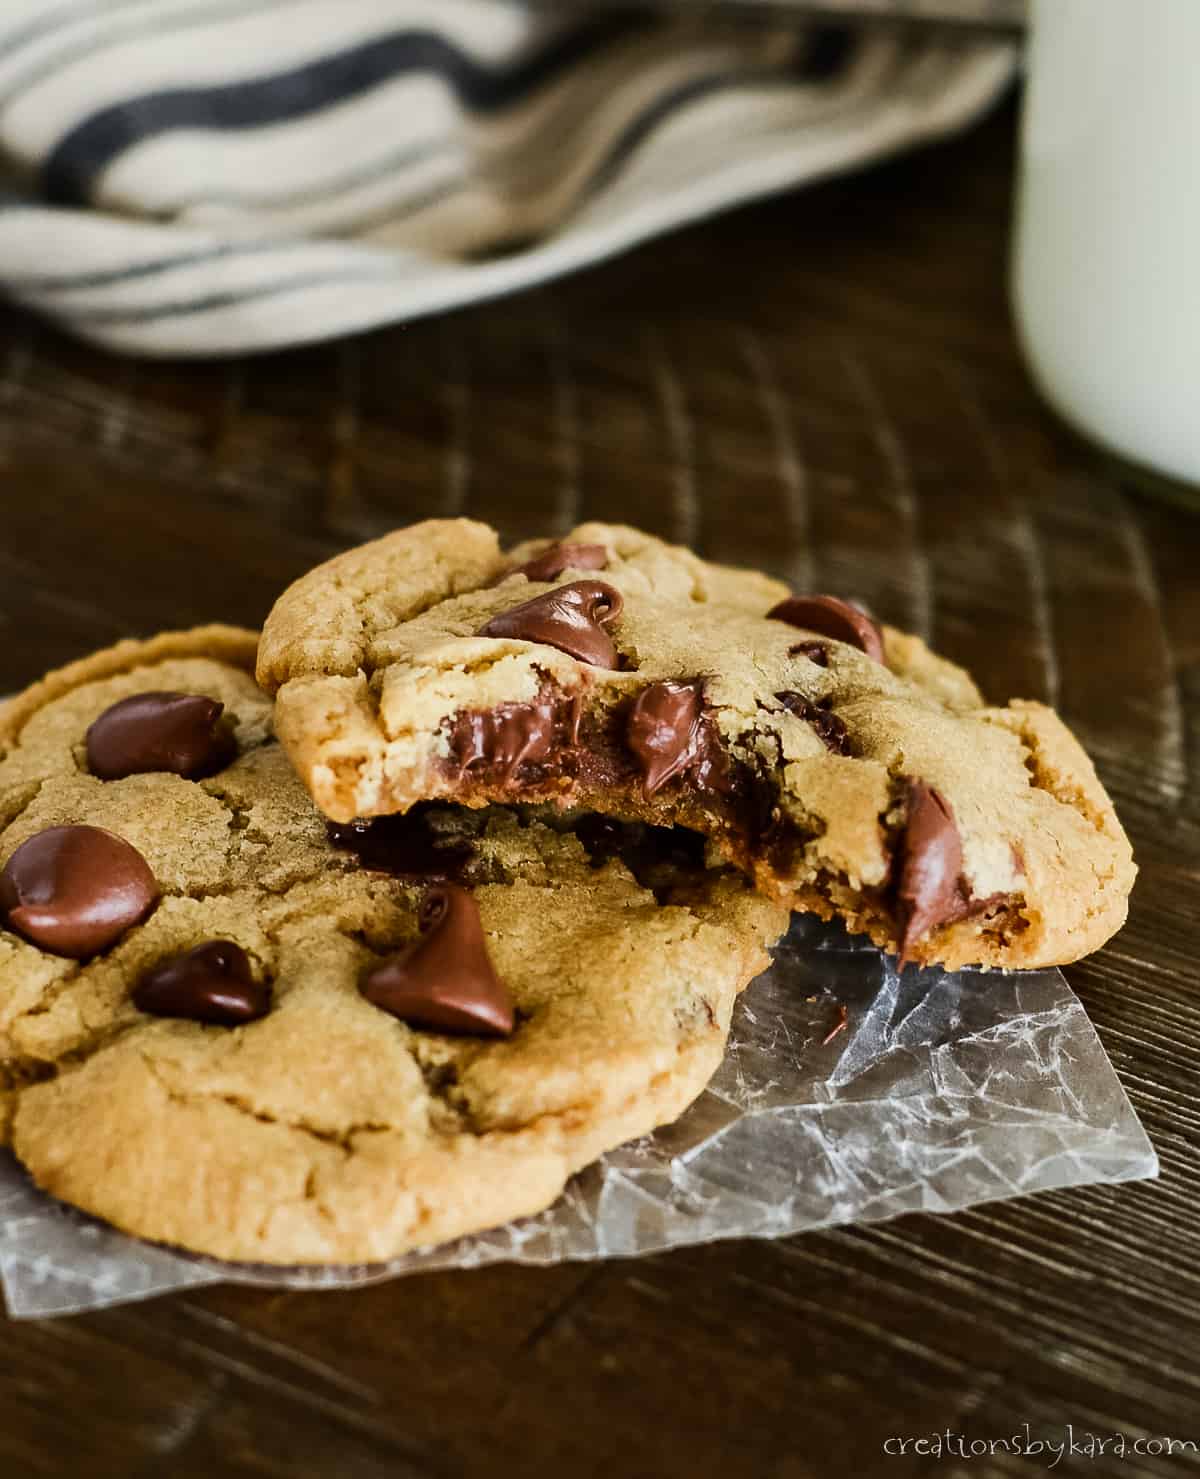 two warm chocolate chip cookies, one with a bite taken out of it